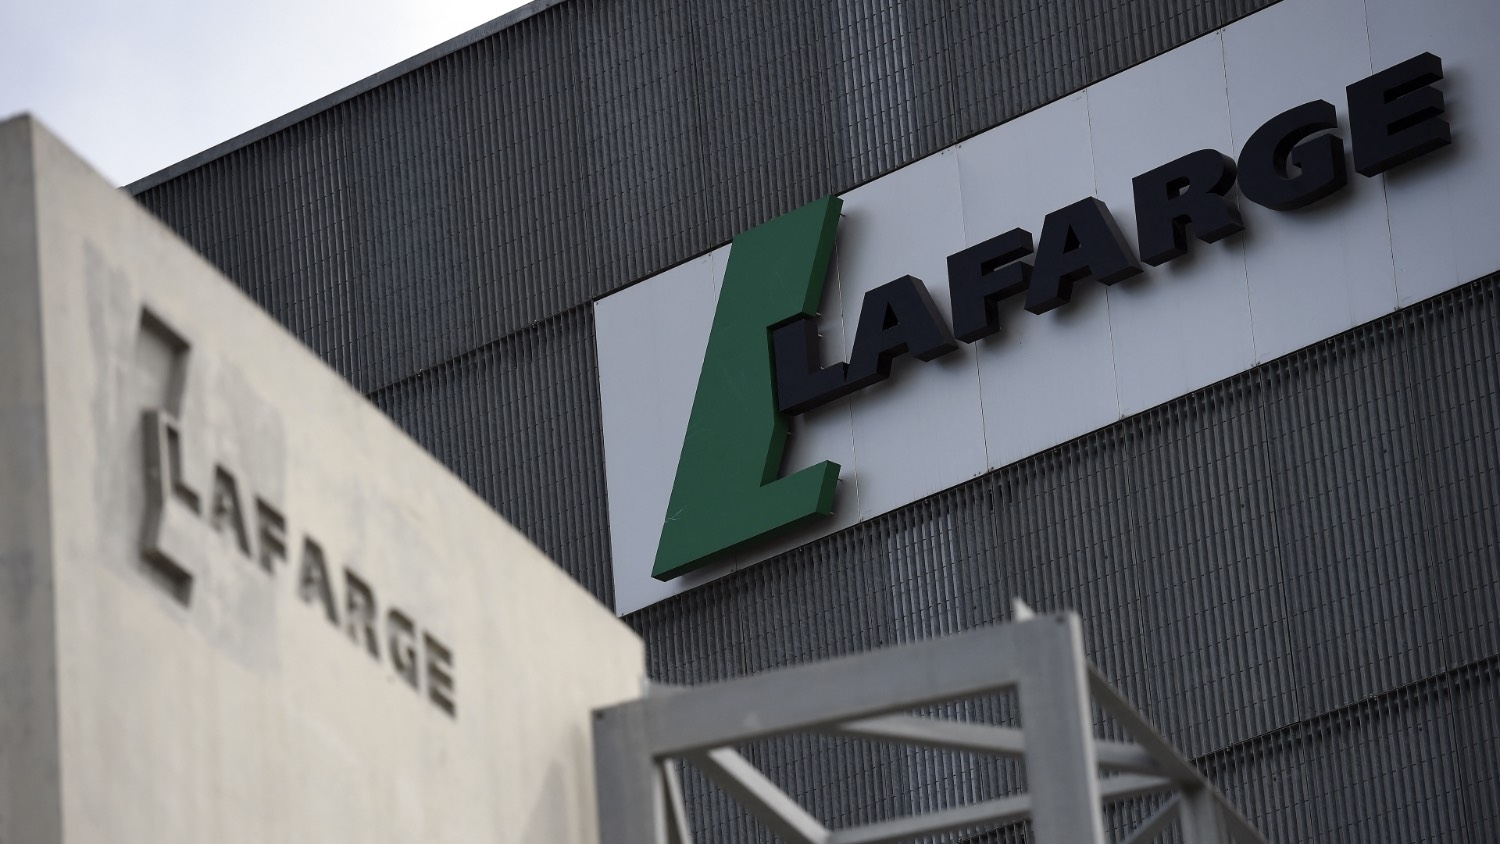 US officials say that from May 2010 to September 2014, Lafarge operated a cement plant in northern Syria